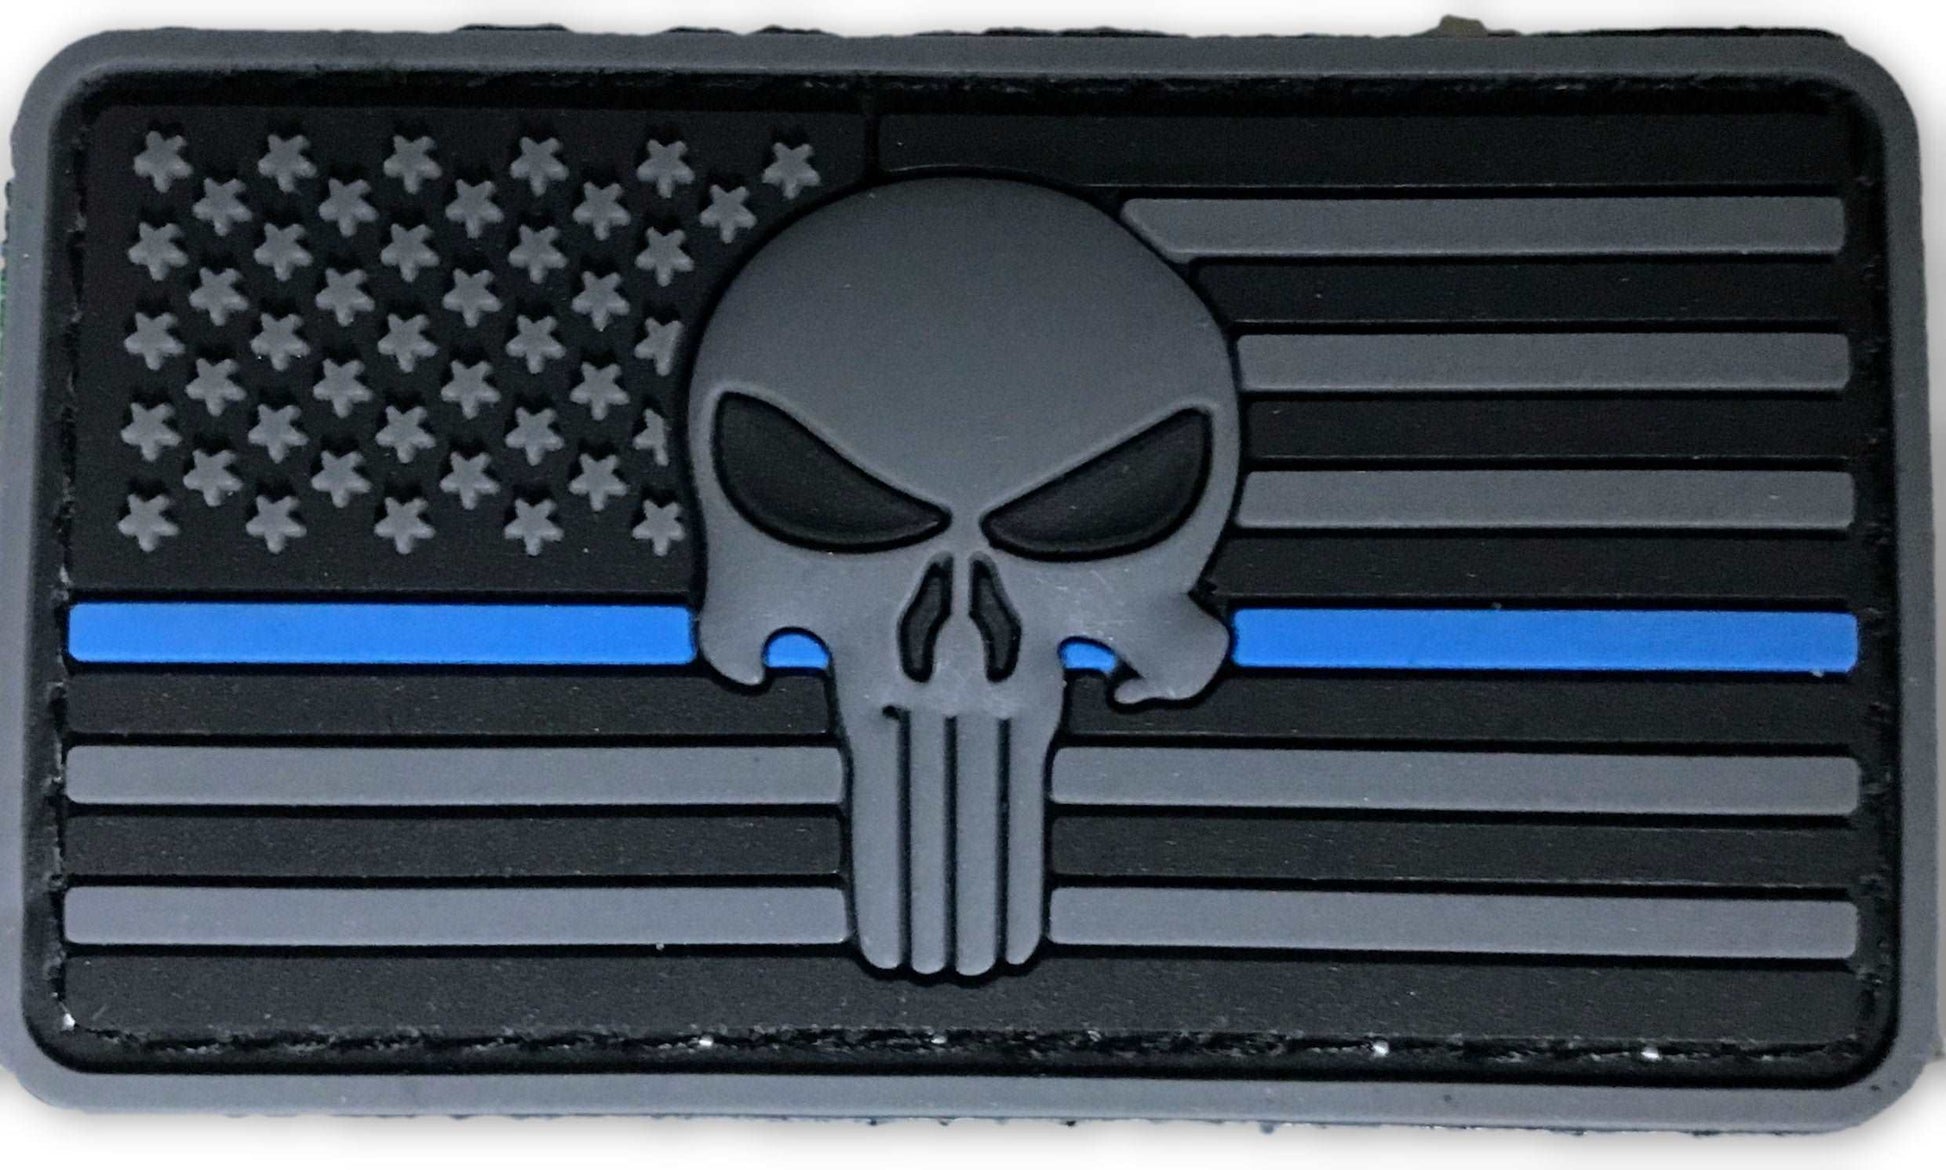 US Flag Punisher 2 dimensional PVC patch